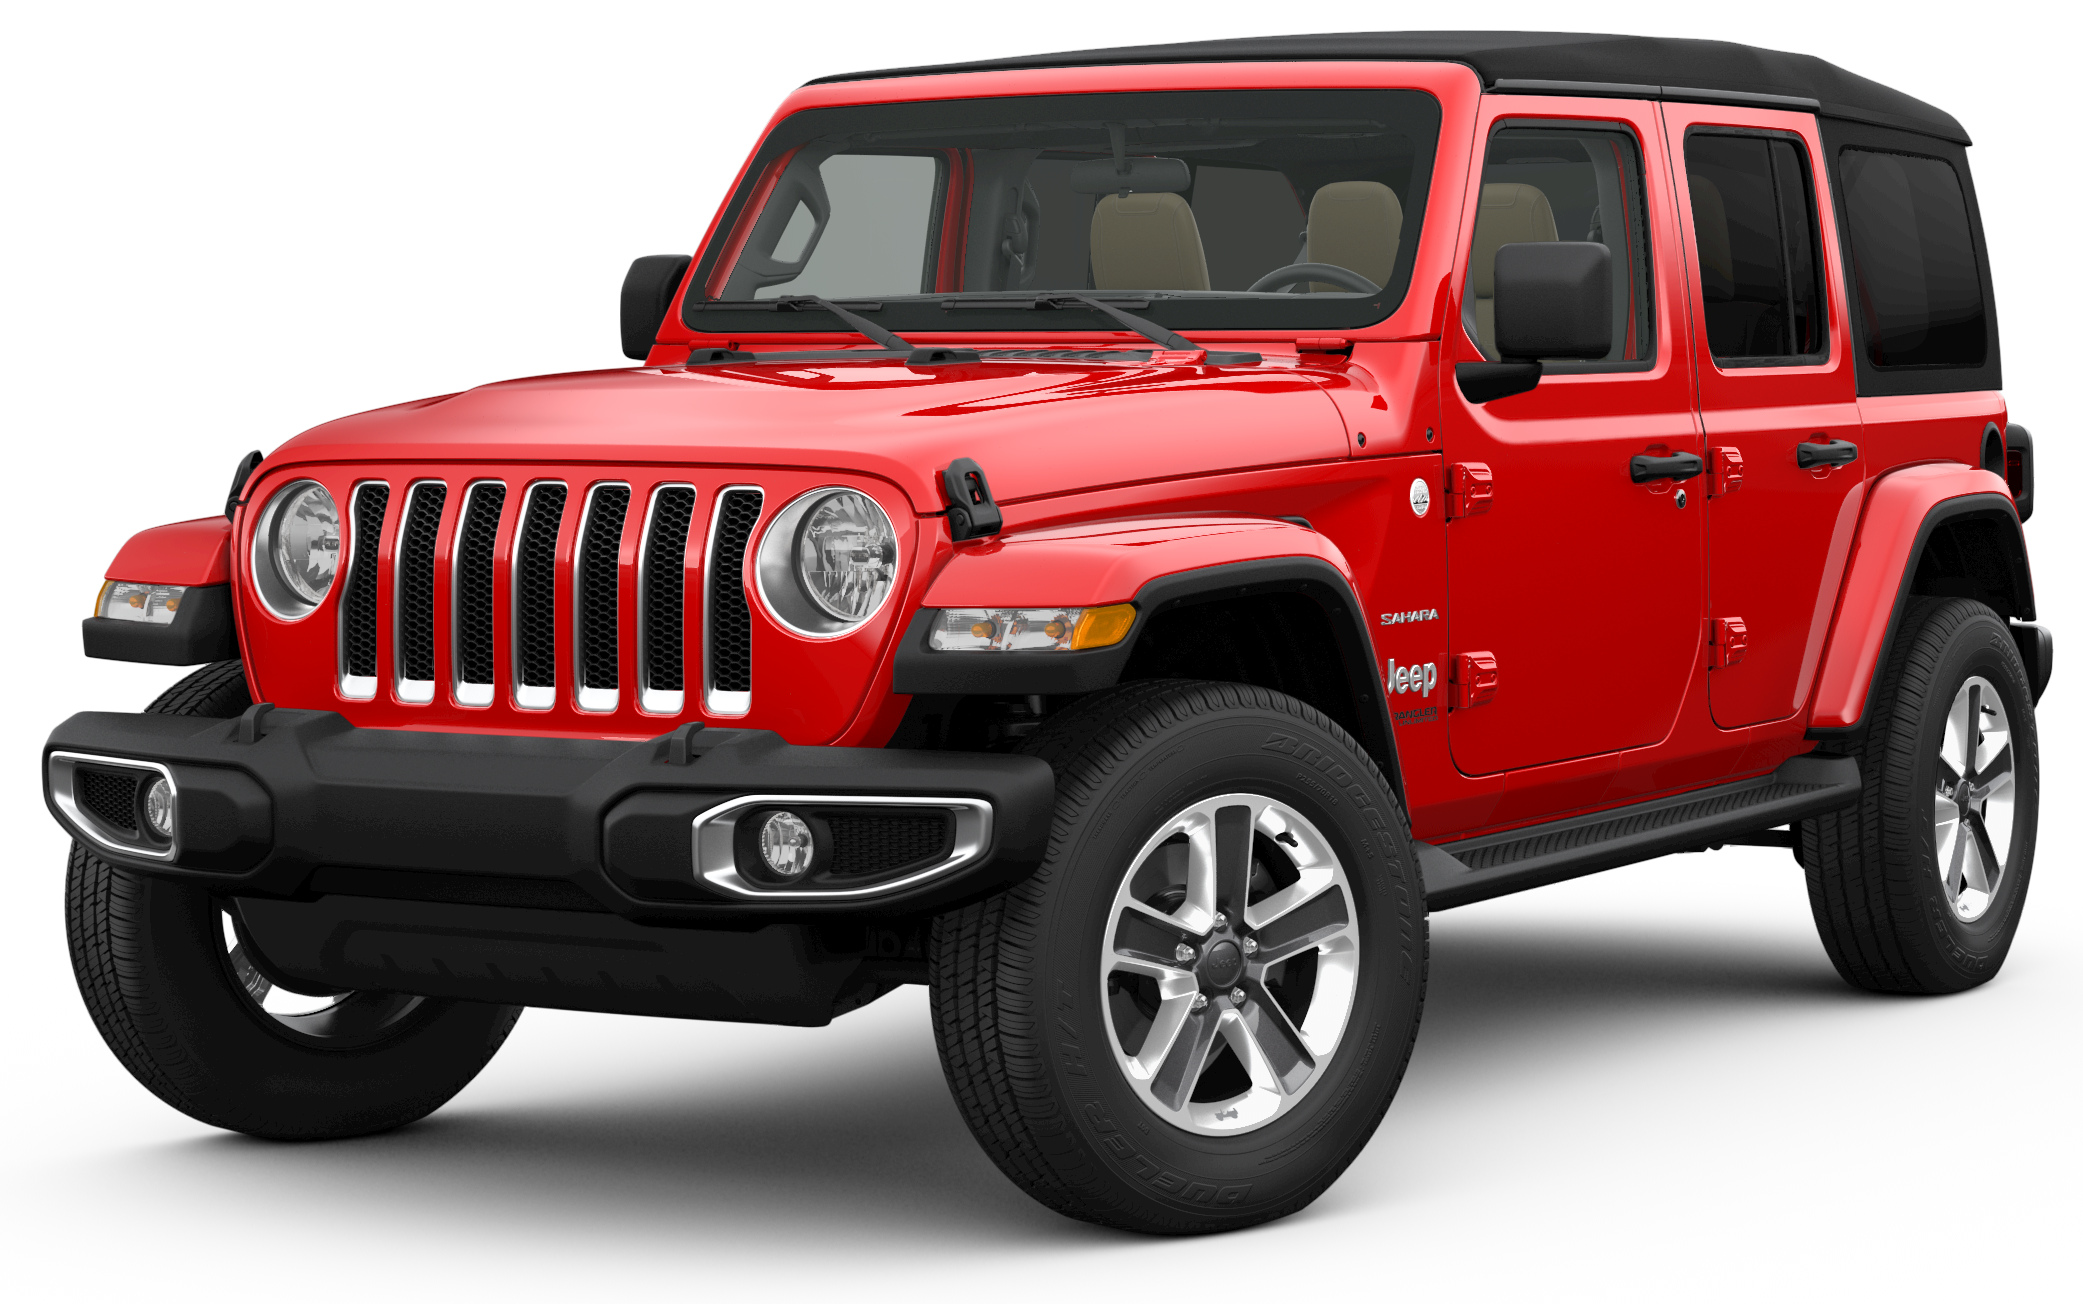 2018-jeep-wrangler-incentives-specials-offers-in-rochester-hills-mi